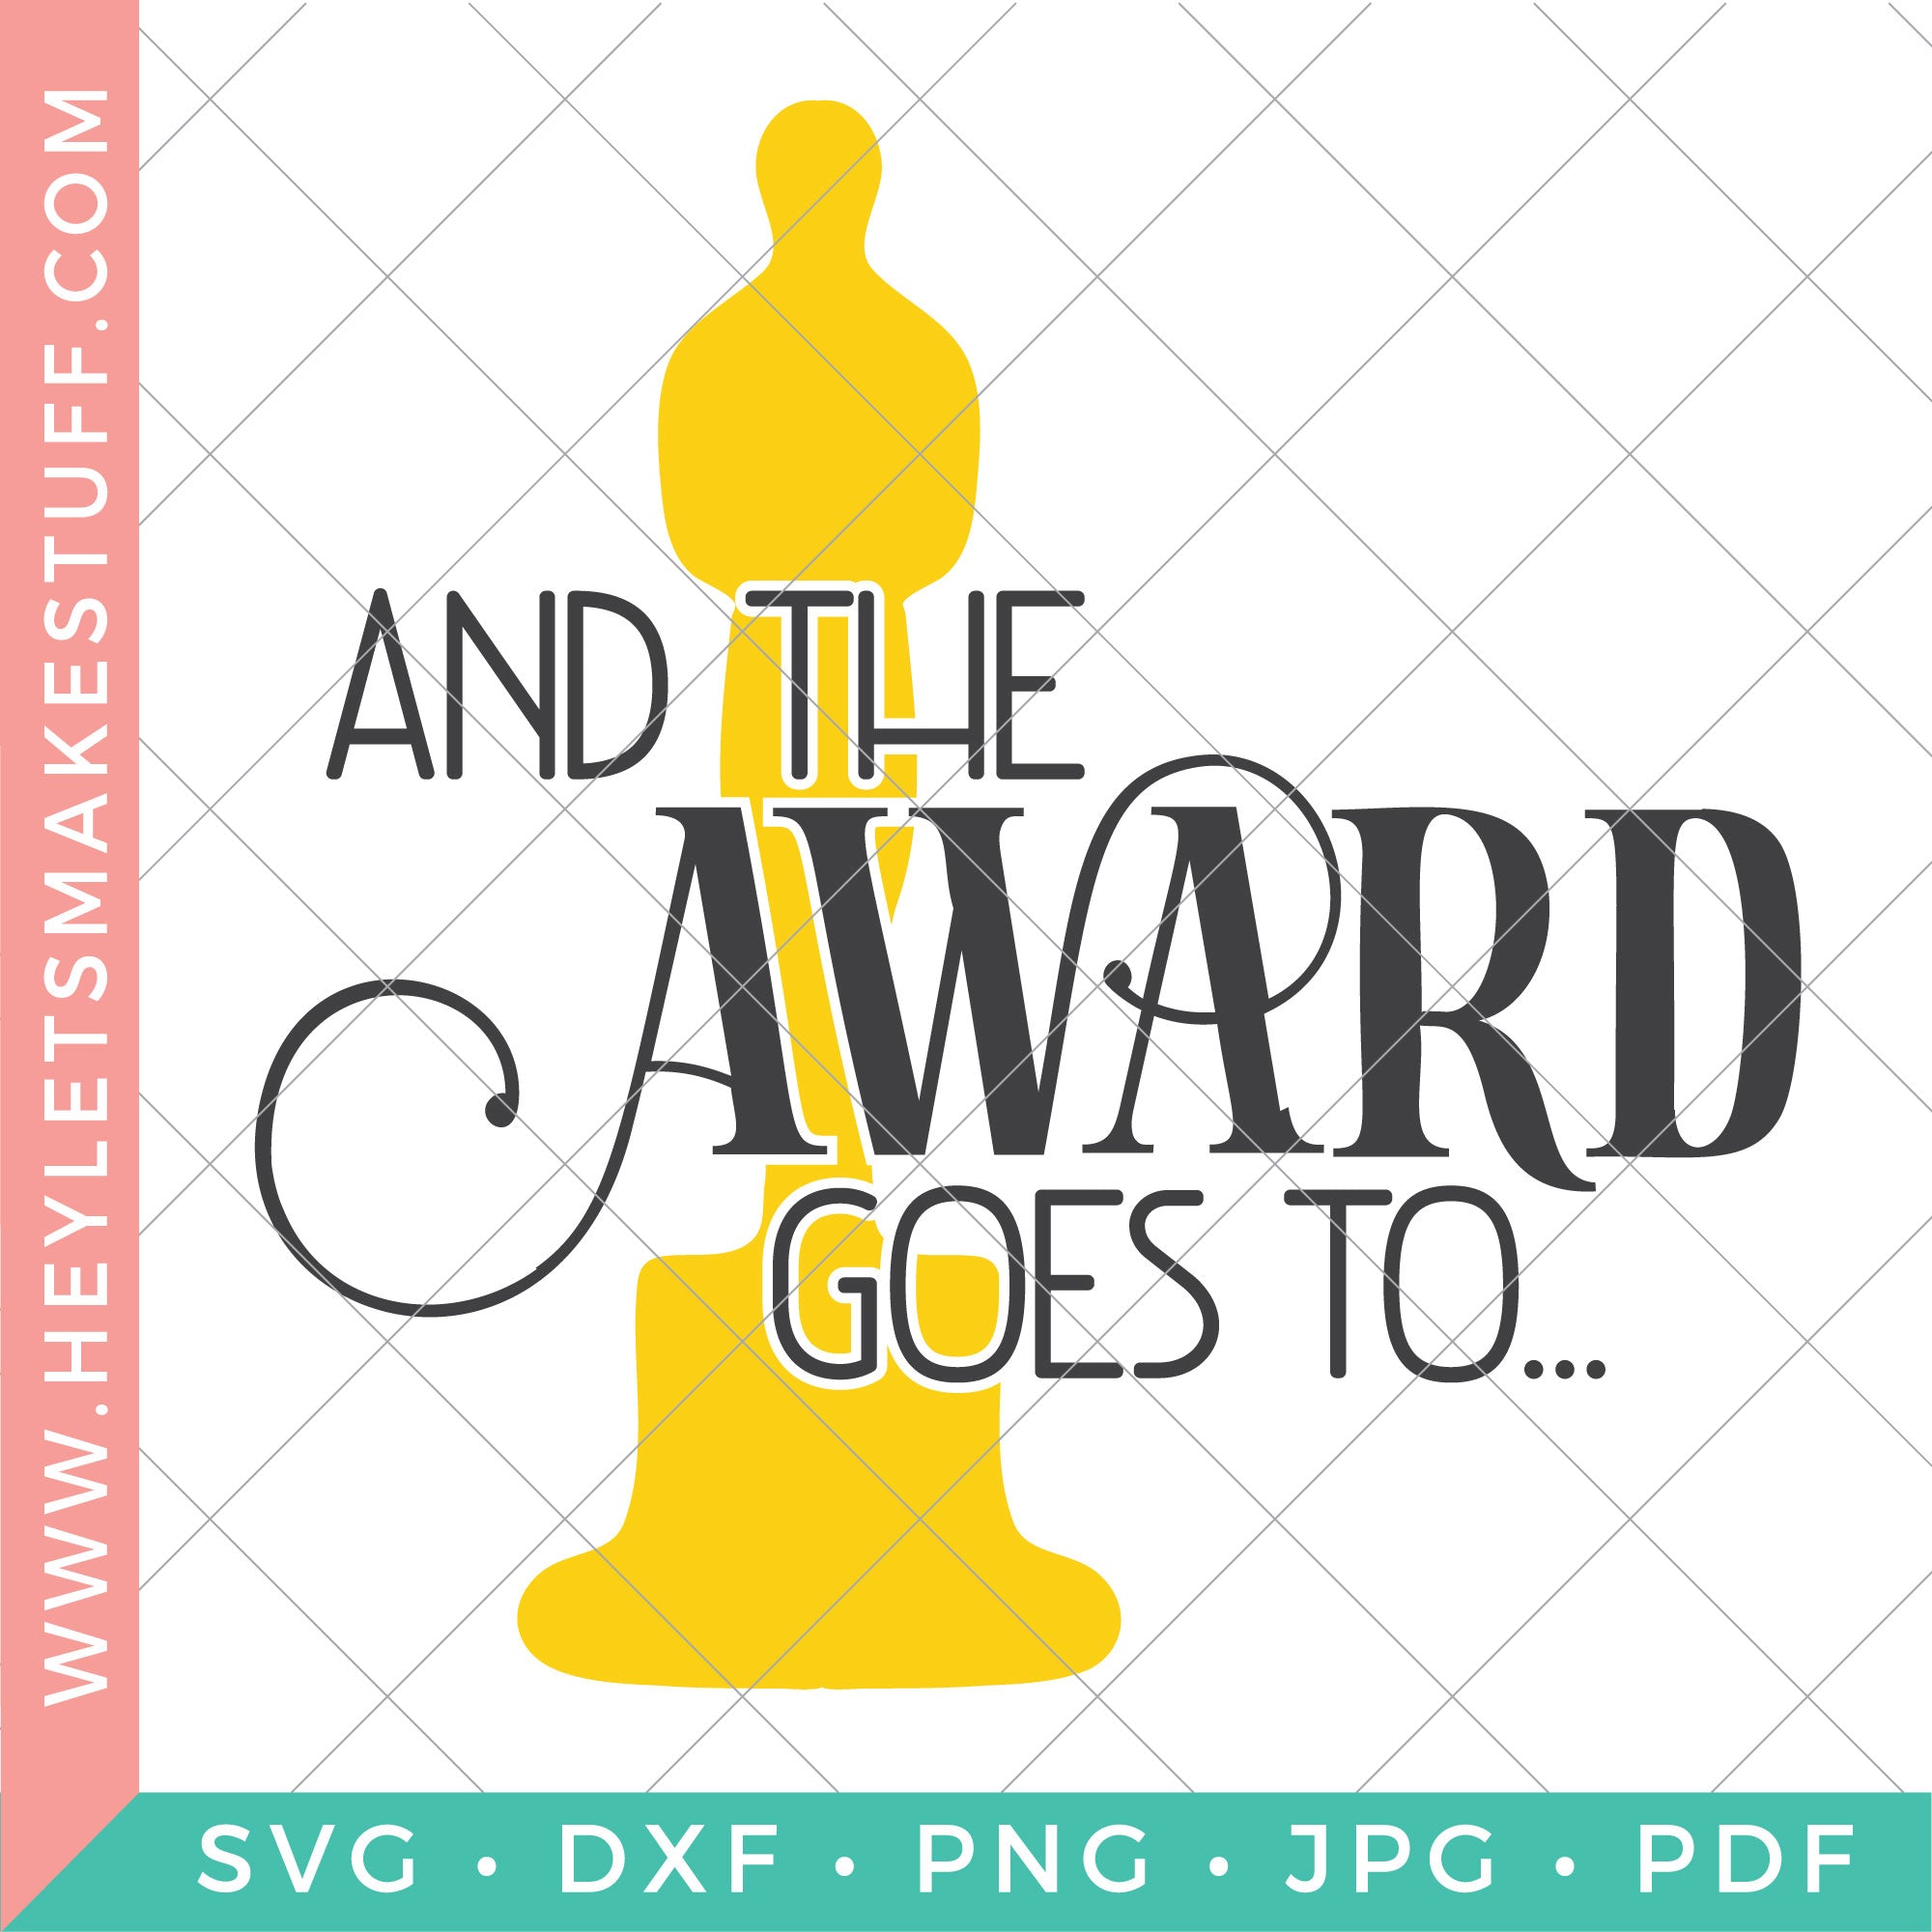 Download Oscars Svg Bundle Four Glitzy Cut Files For The Academy Awards